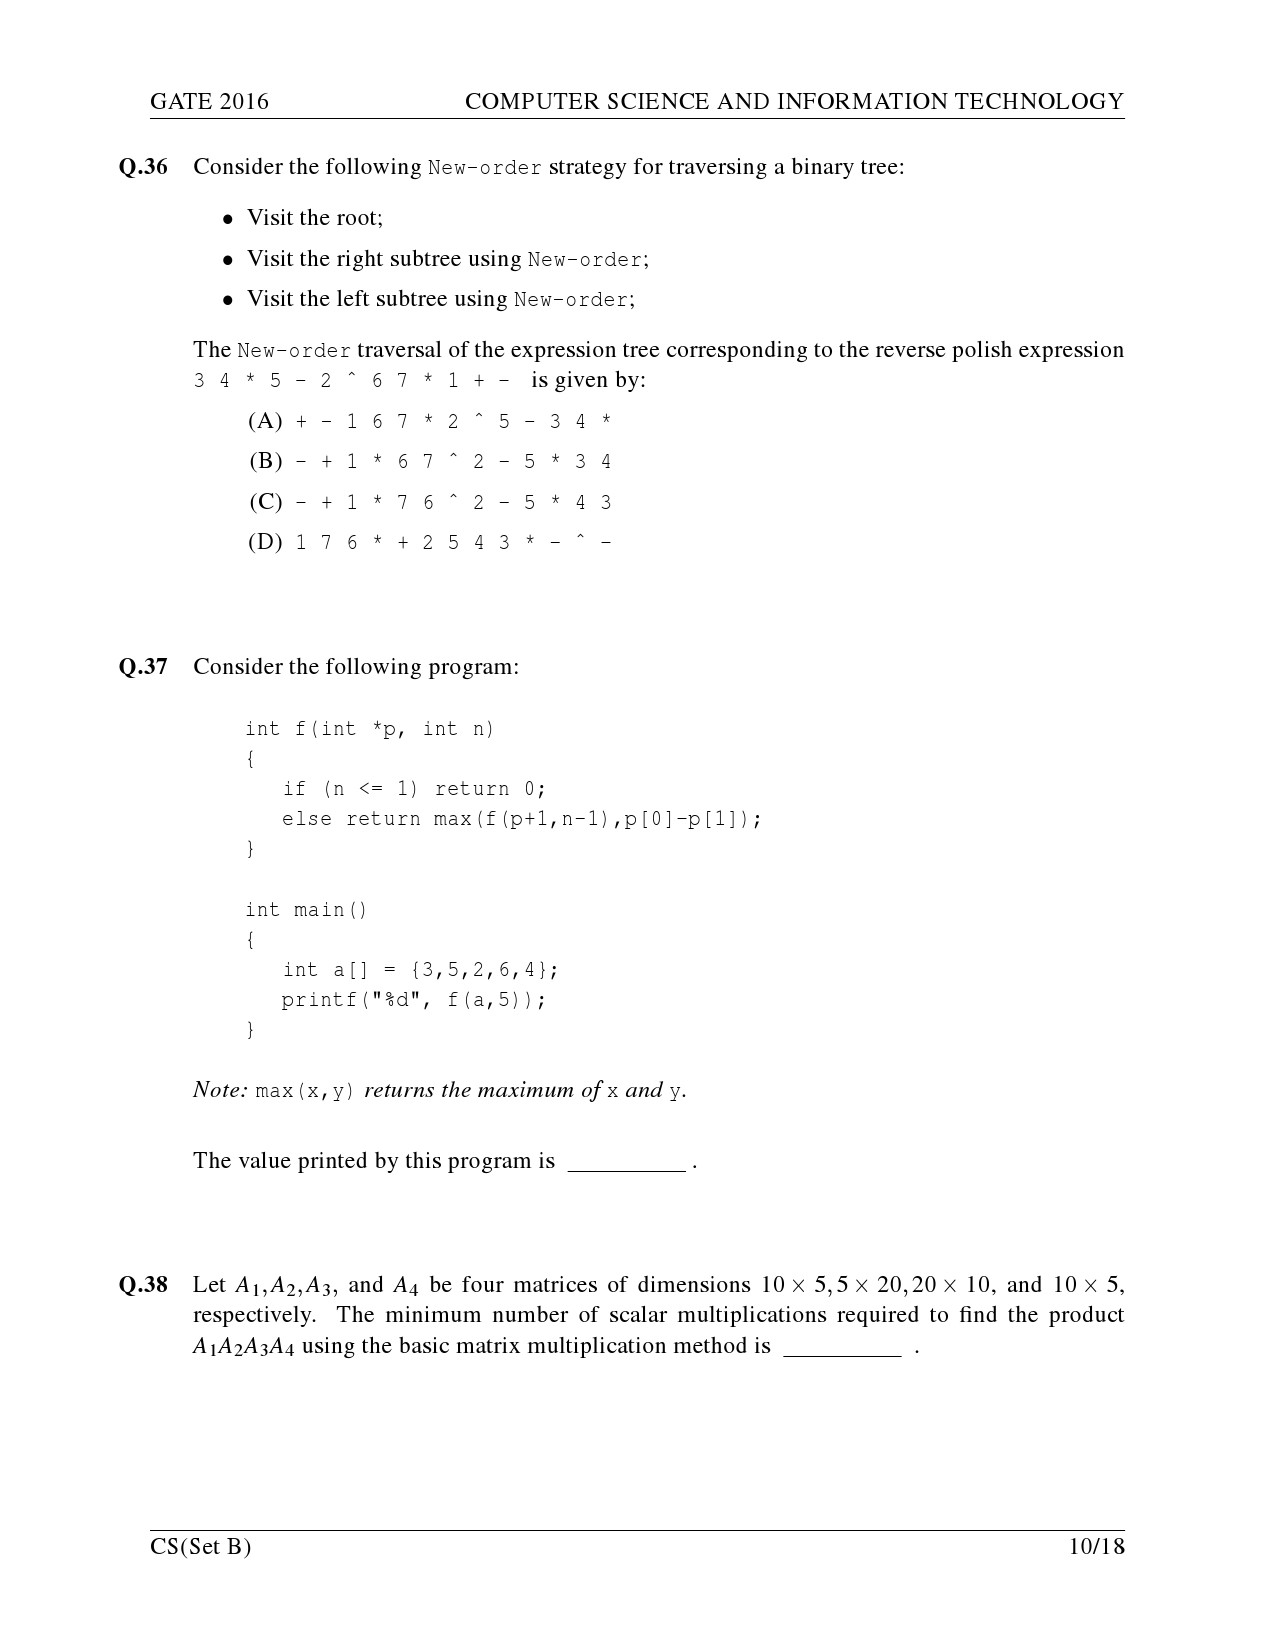 GATE Exam Question Paper 2016 Computer Science and Information Technology Set B 13